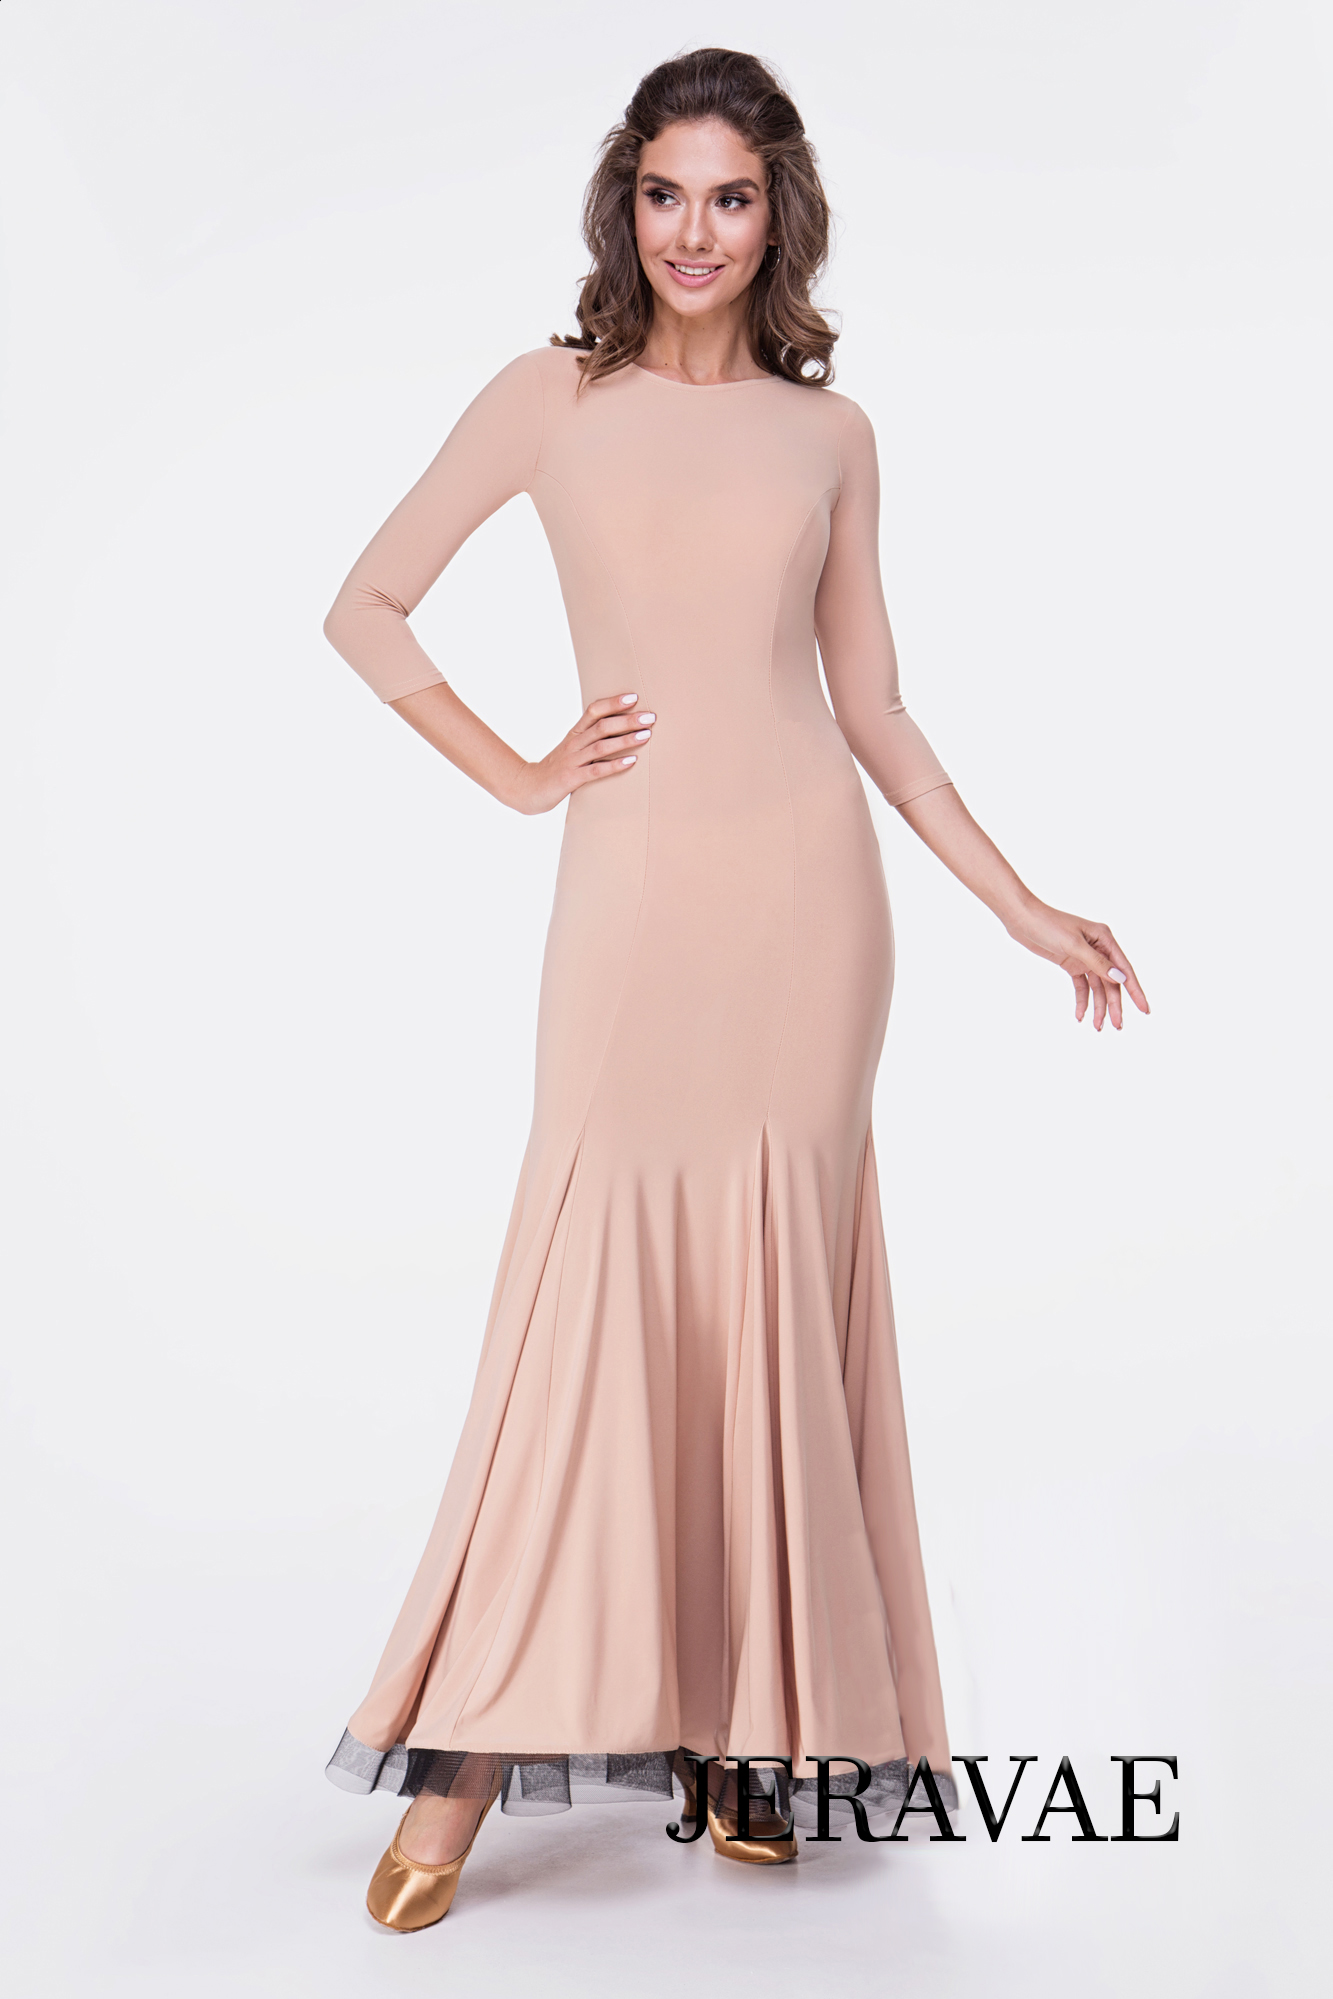 Classy Ballroom Practice Dress with 3/4 Sleeves and Horsehair Hem in Light Peach